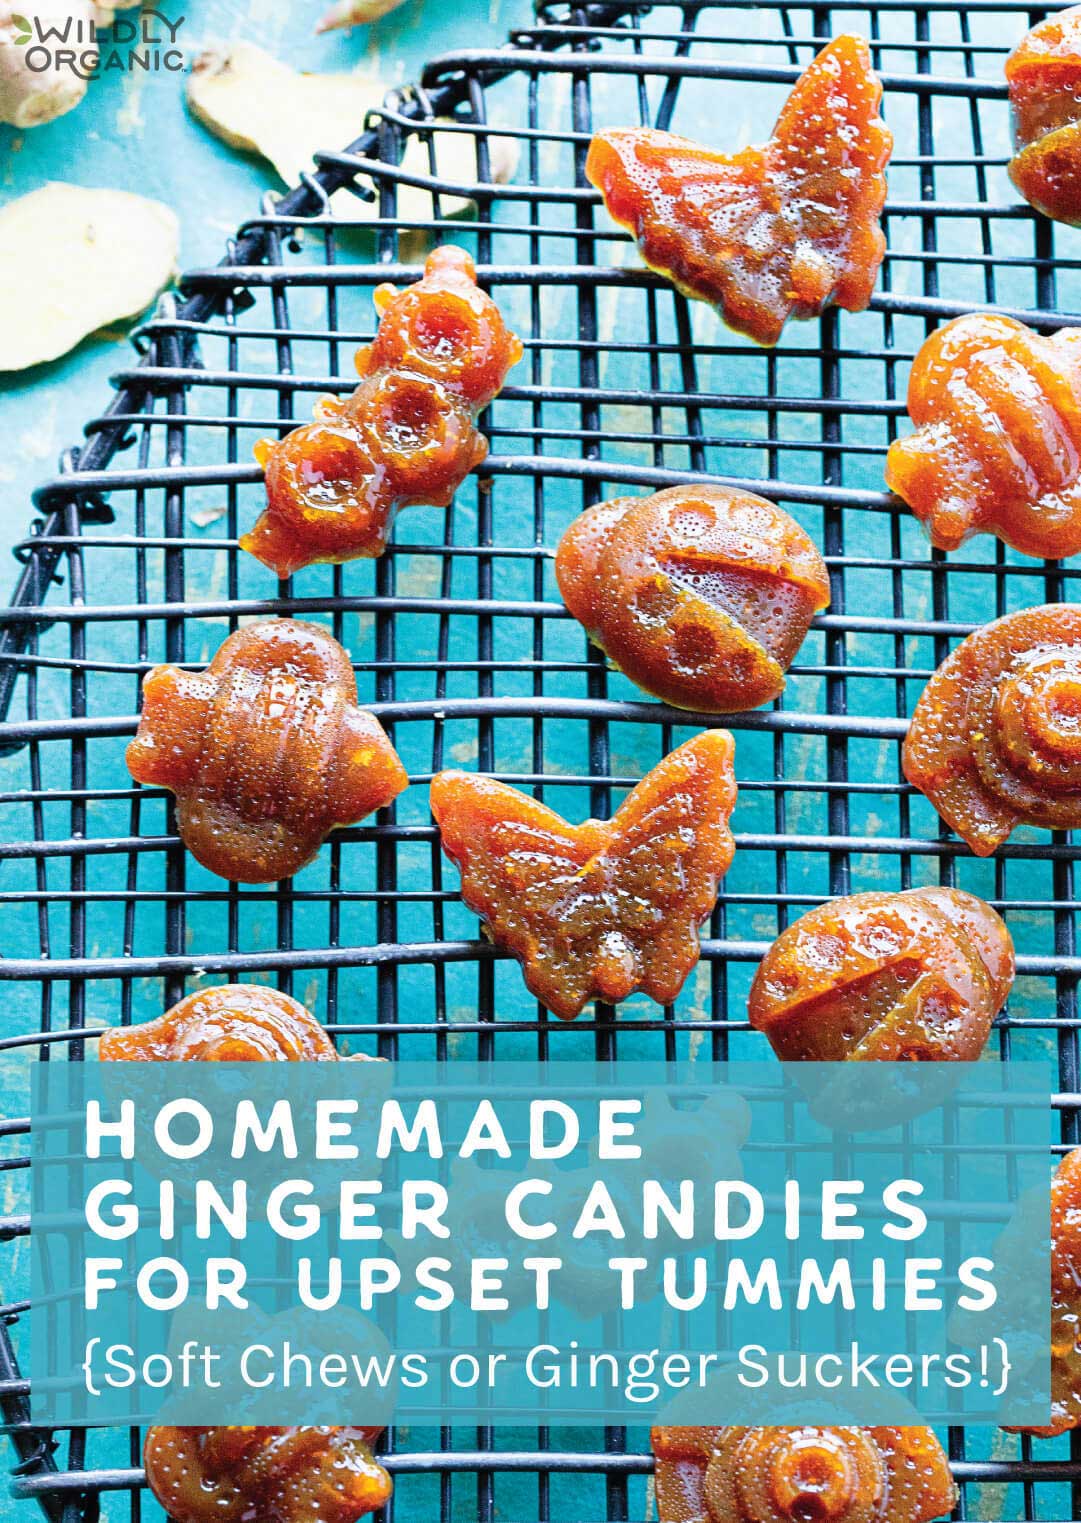 Homemade ginger candies for nausea